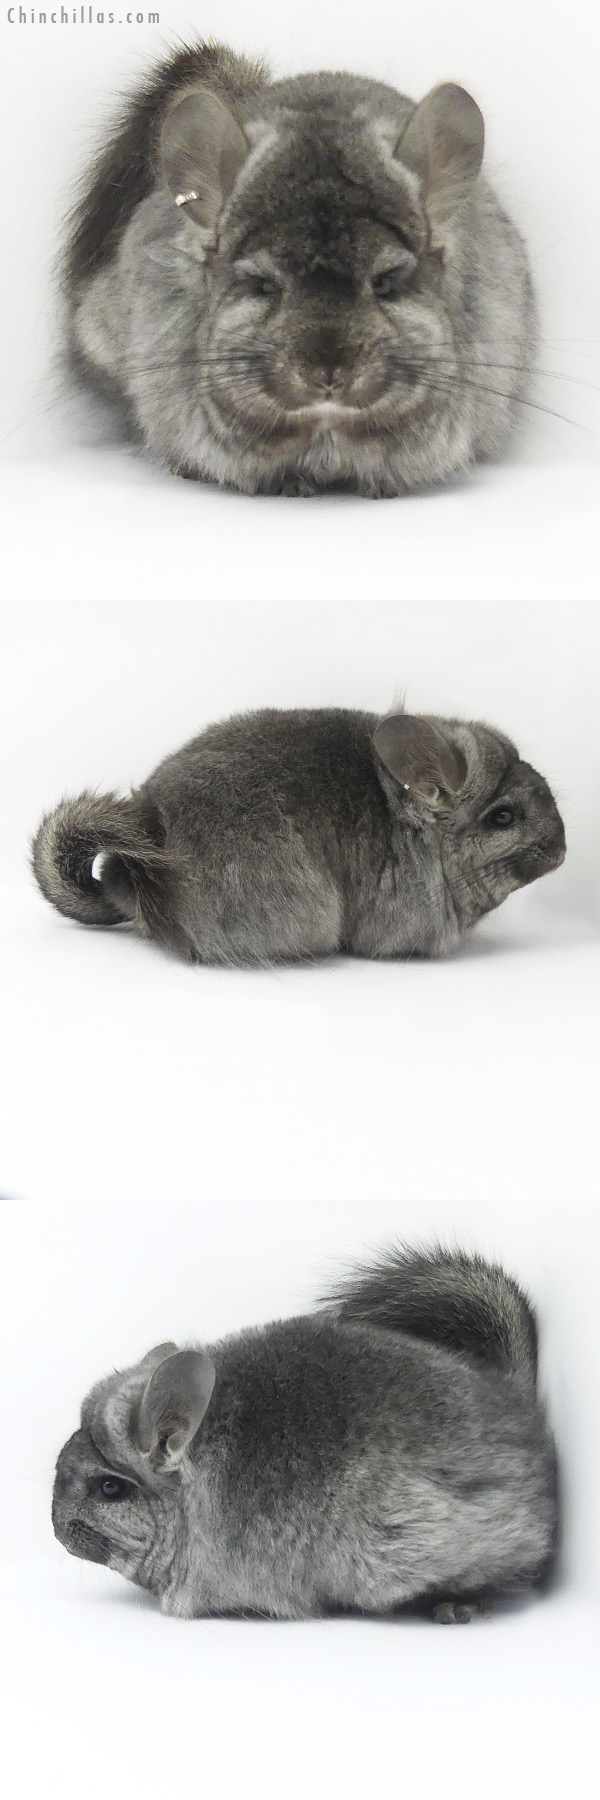 Chinchilla or related item offered for sale or export on Chinchillas.com - 19394 Ebony G2  Royal Persian Angora Female Chinchilla